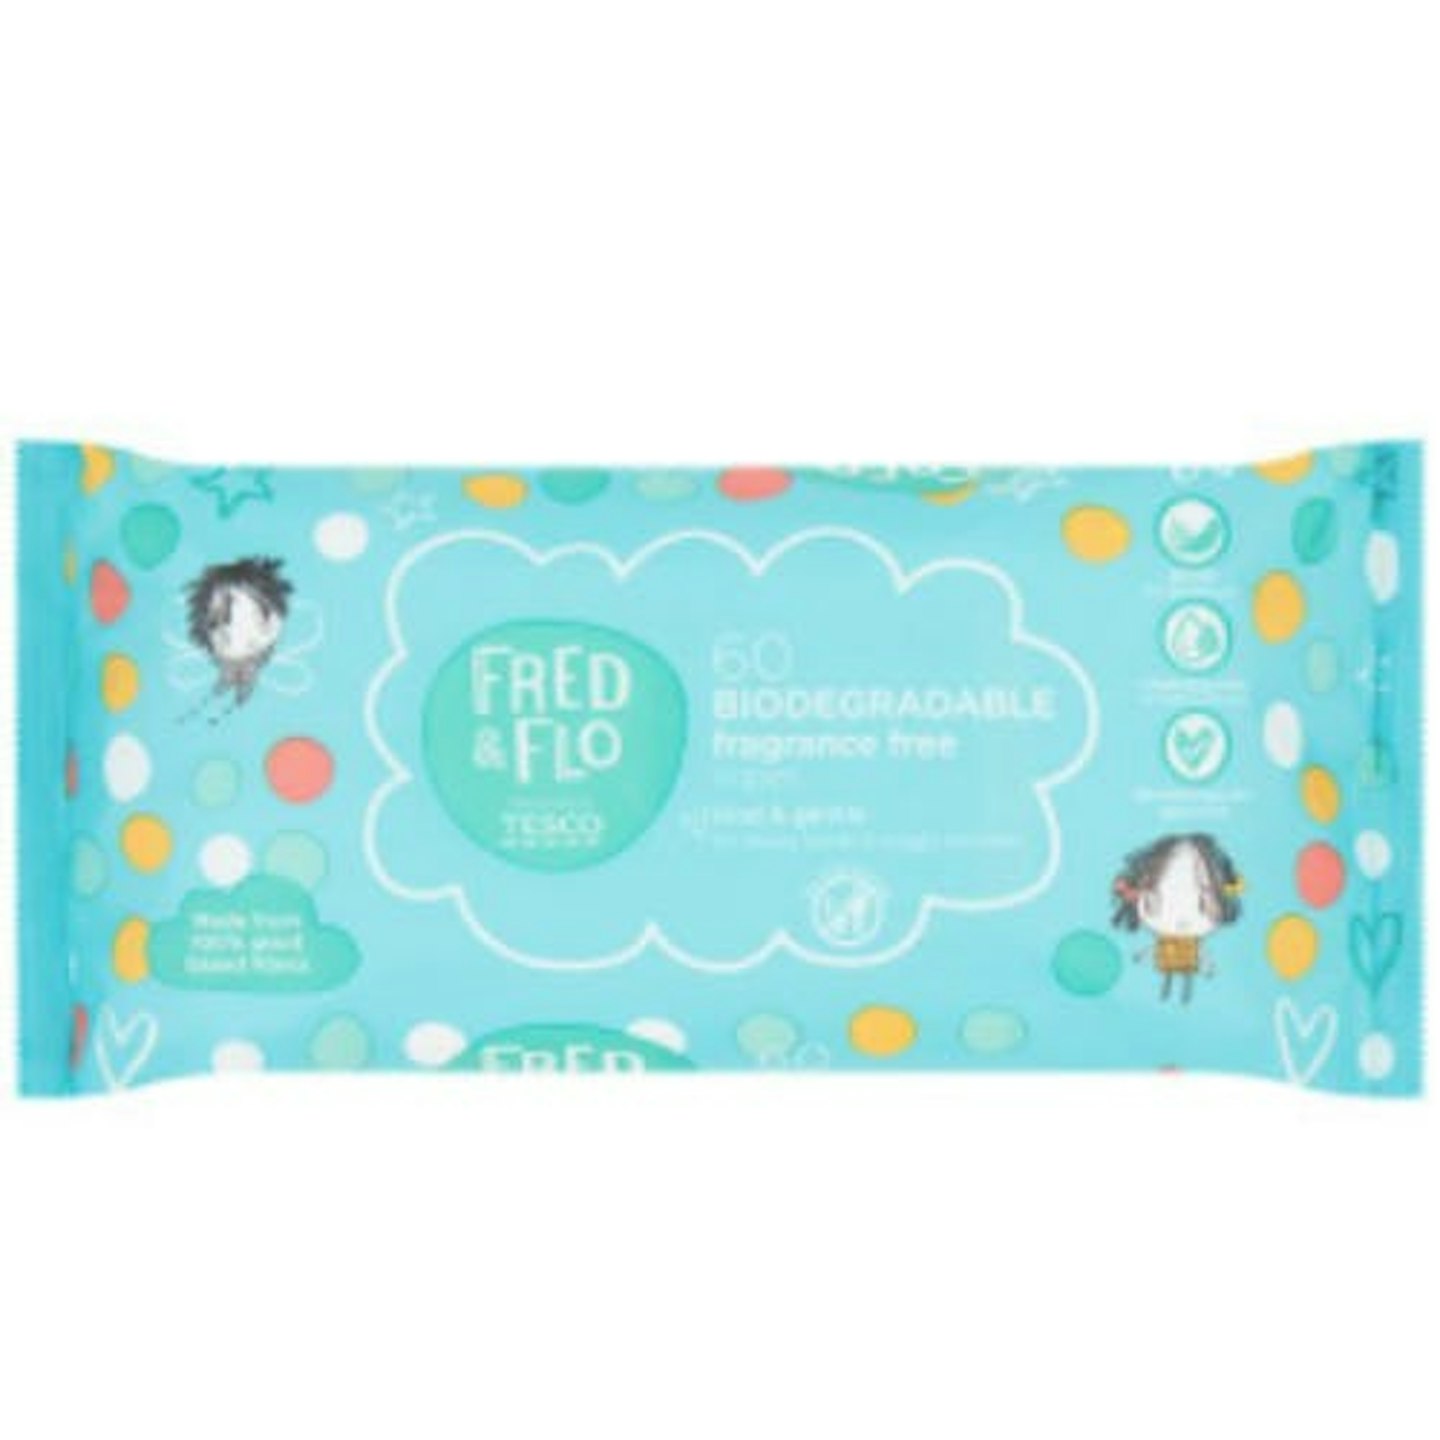 Fred and Flo 60 Biodegradable Fragrance Free baby wipes